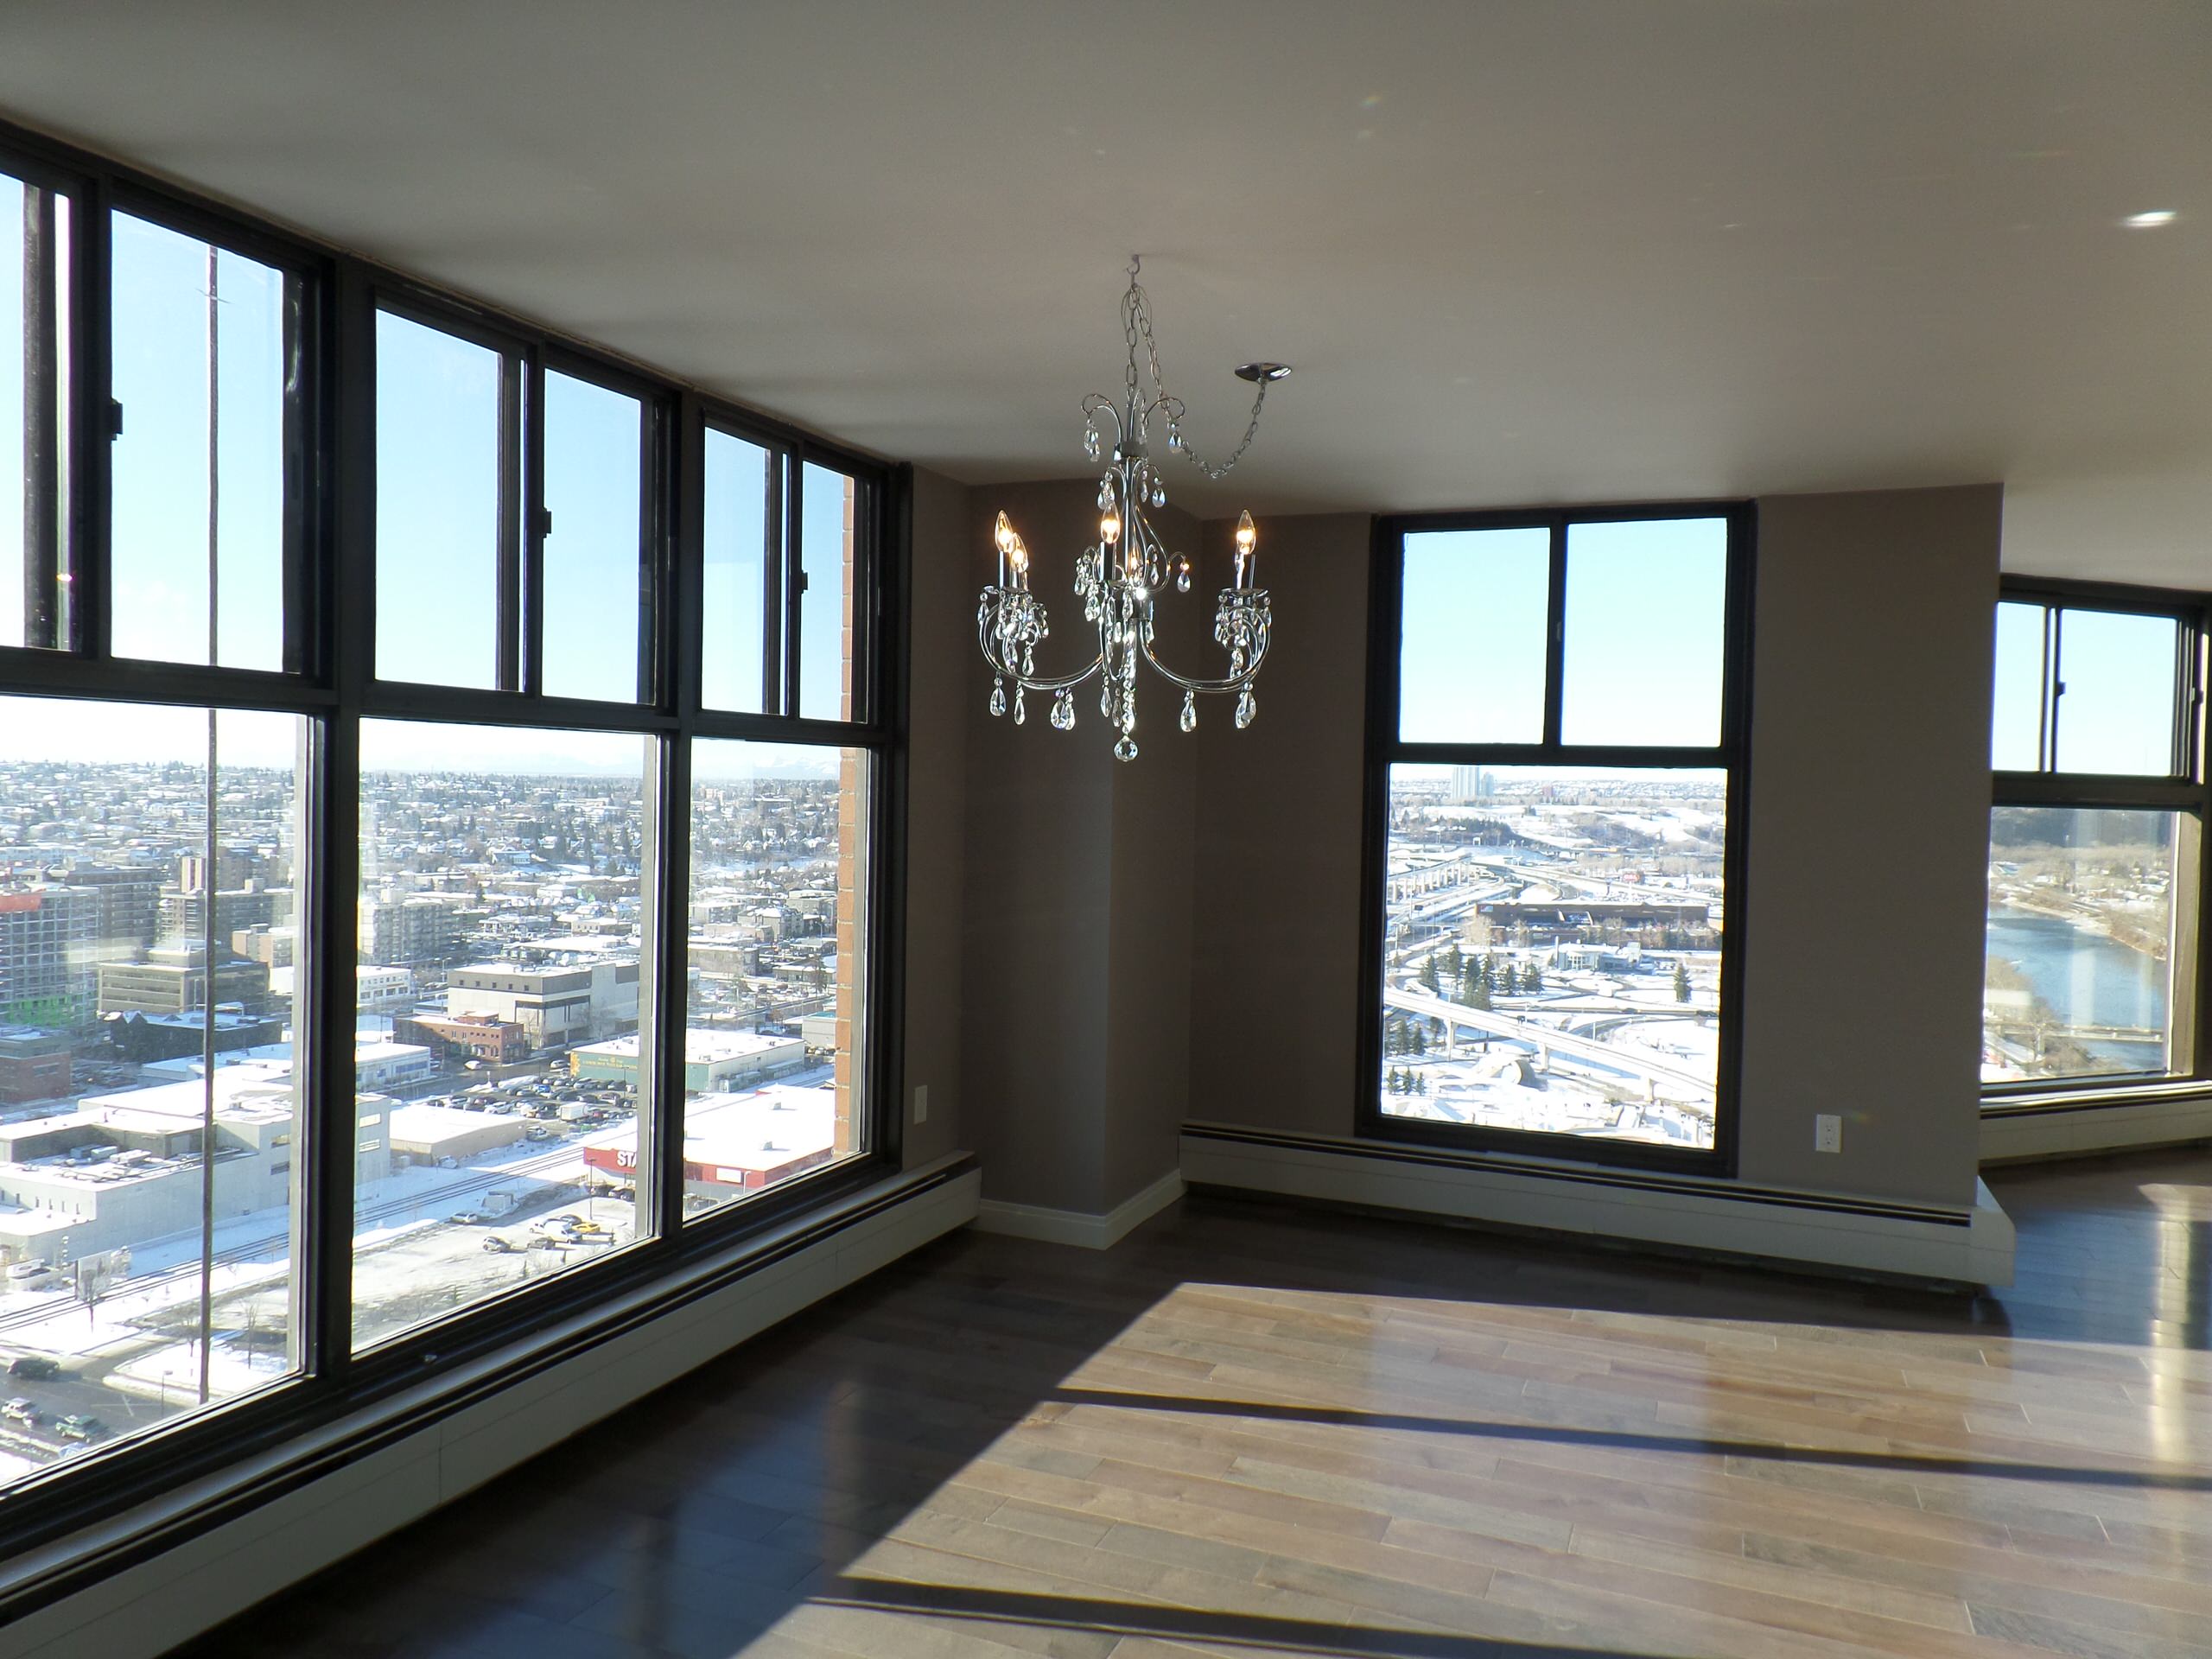 Penthouse Condo Remodel